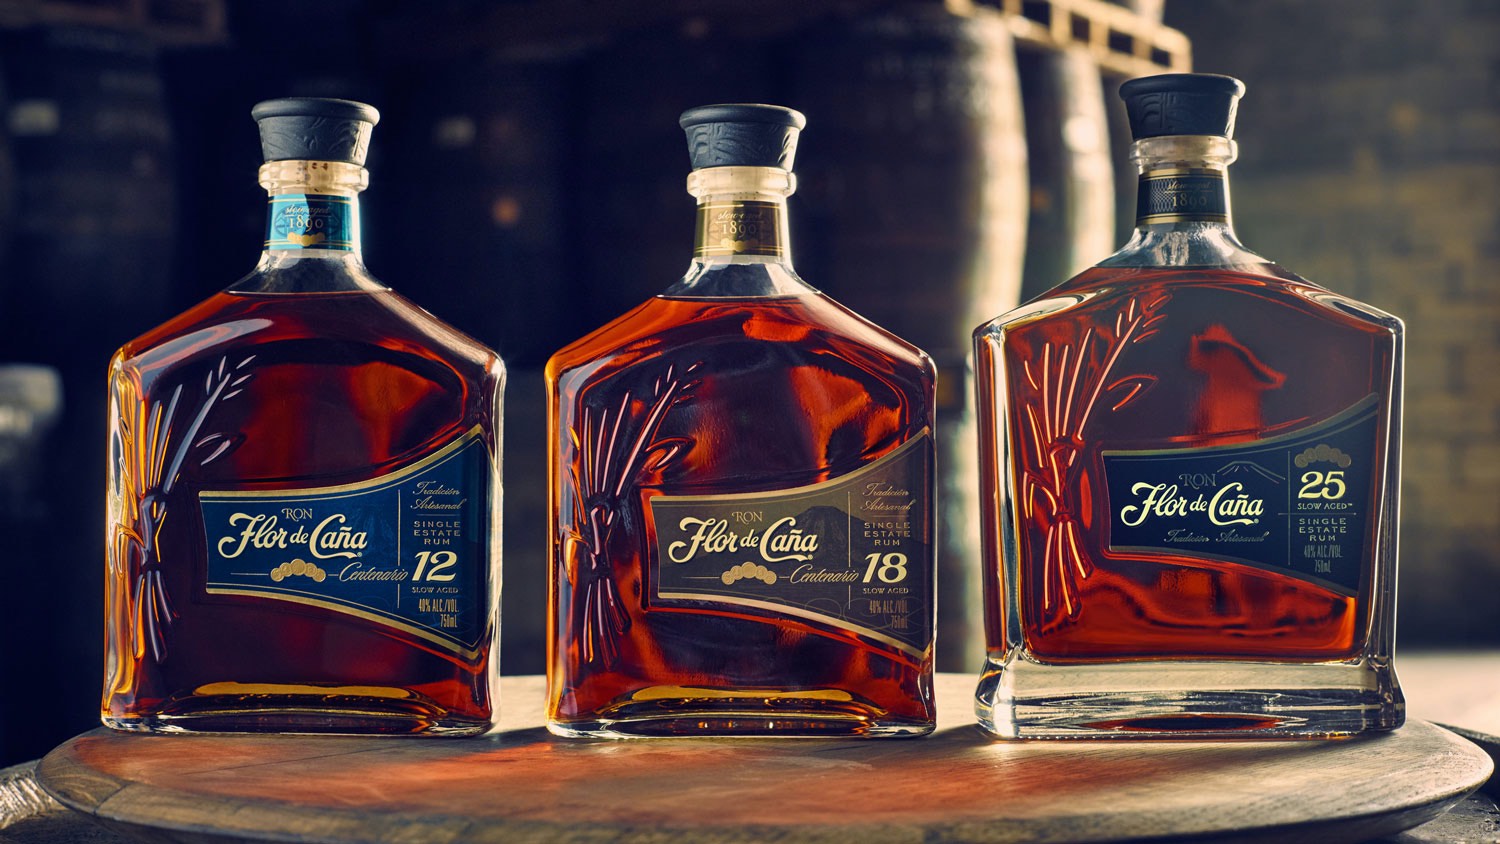 The Story Behind Flor de Caña: the Fair Trade and Sustainable Rum from Nicaragua